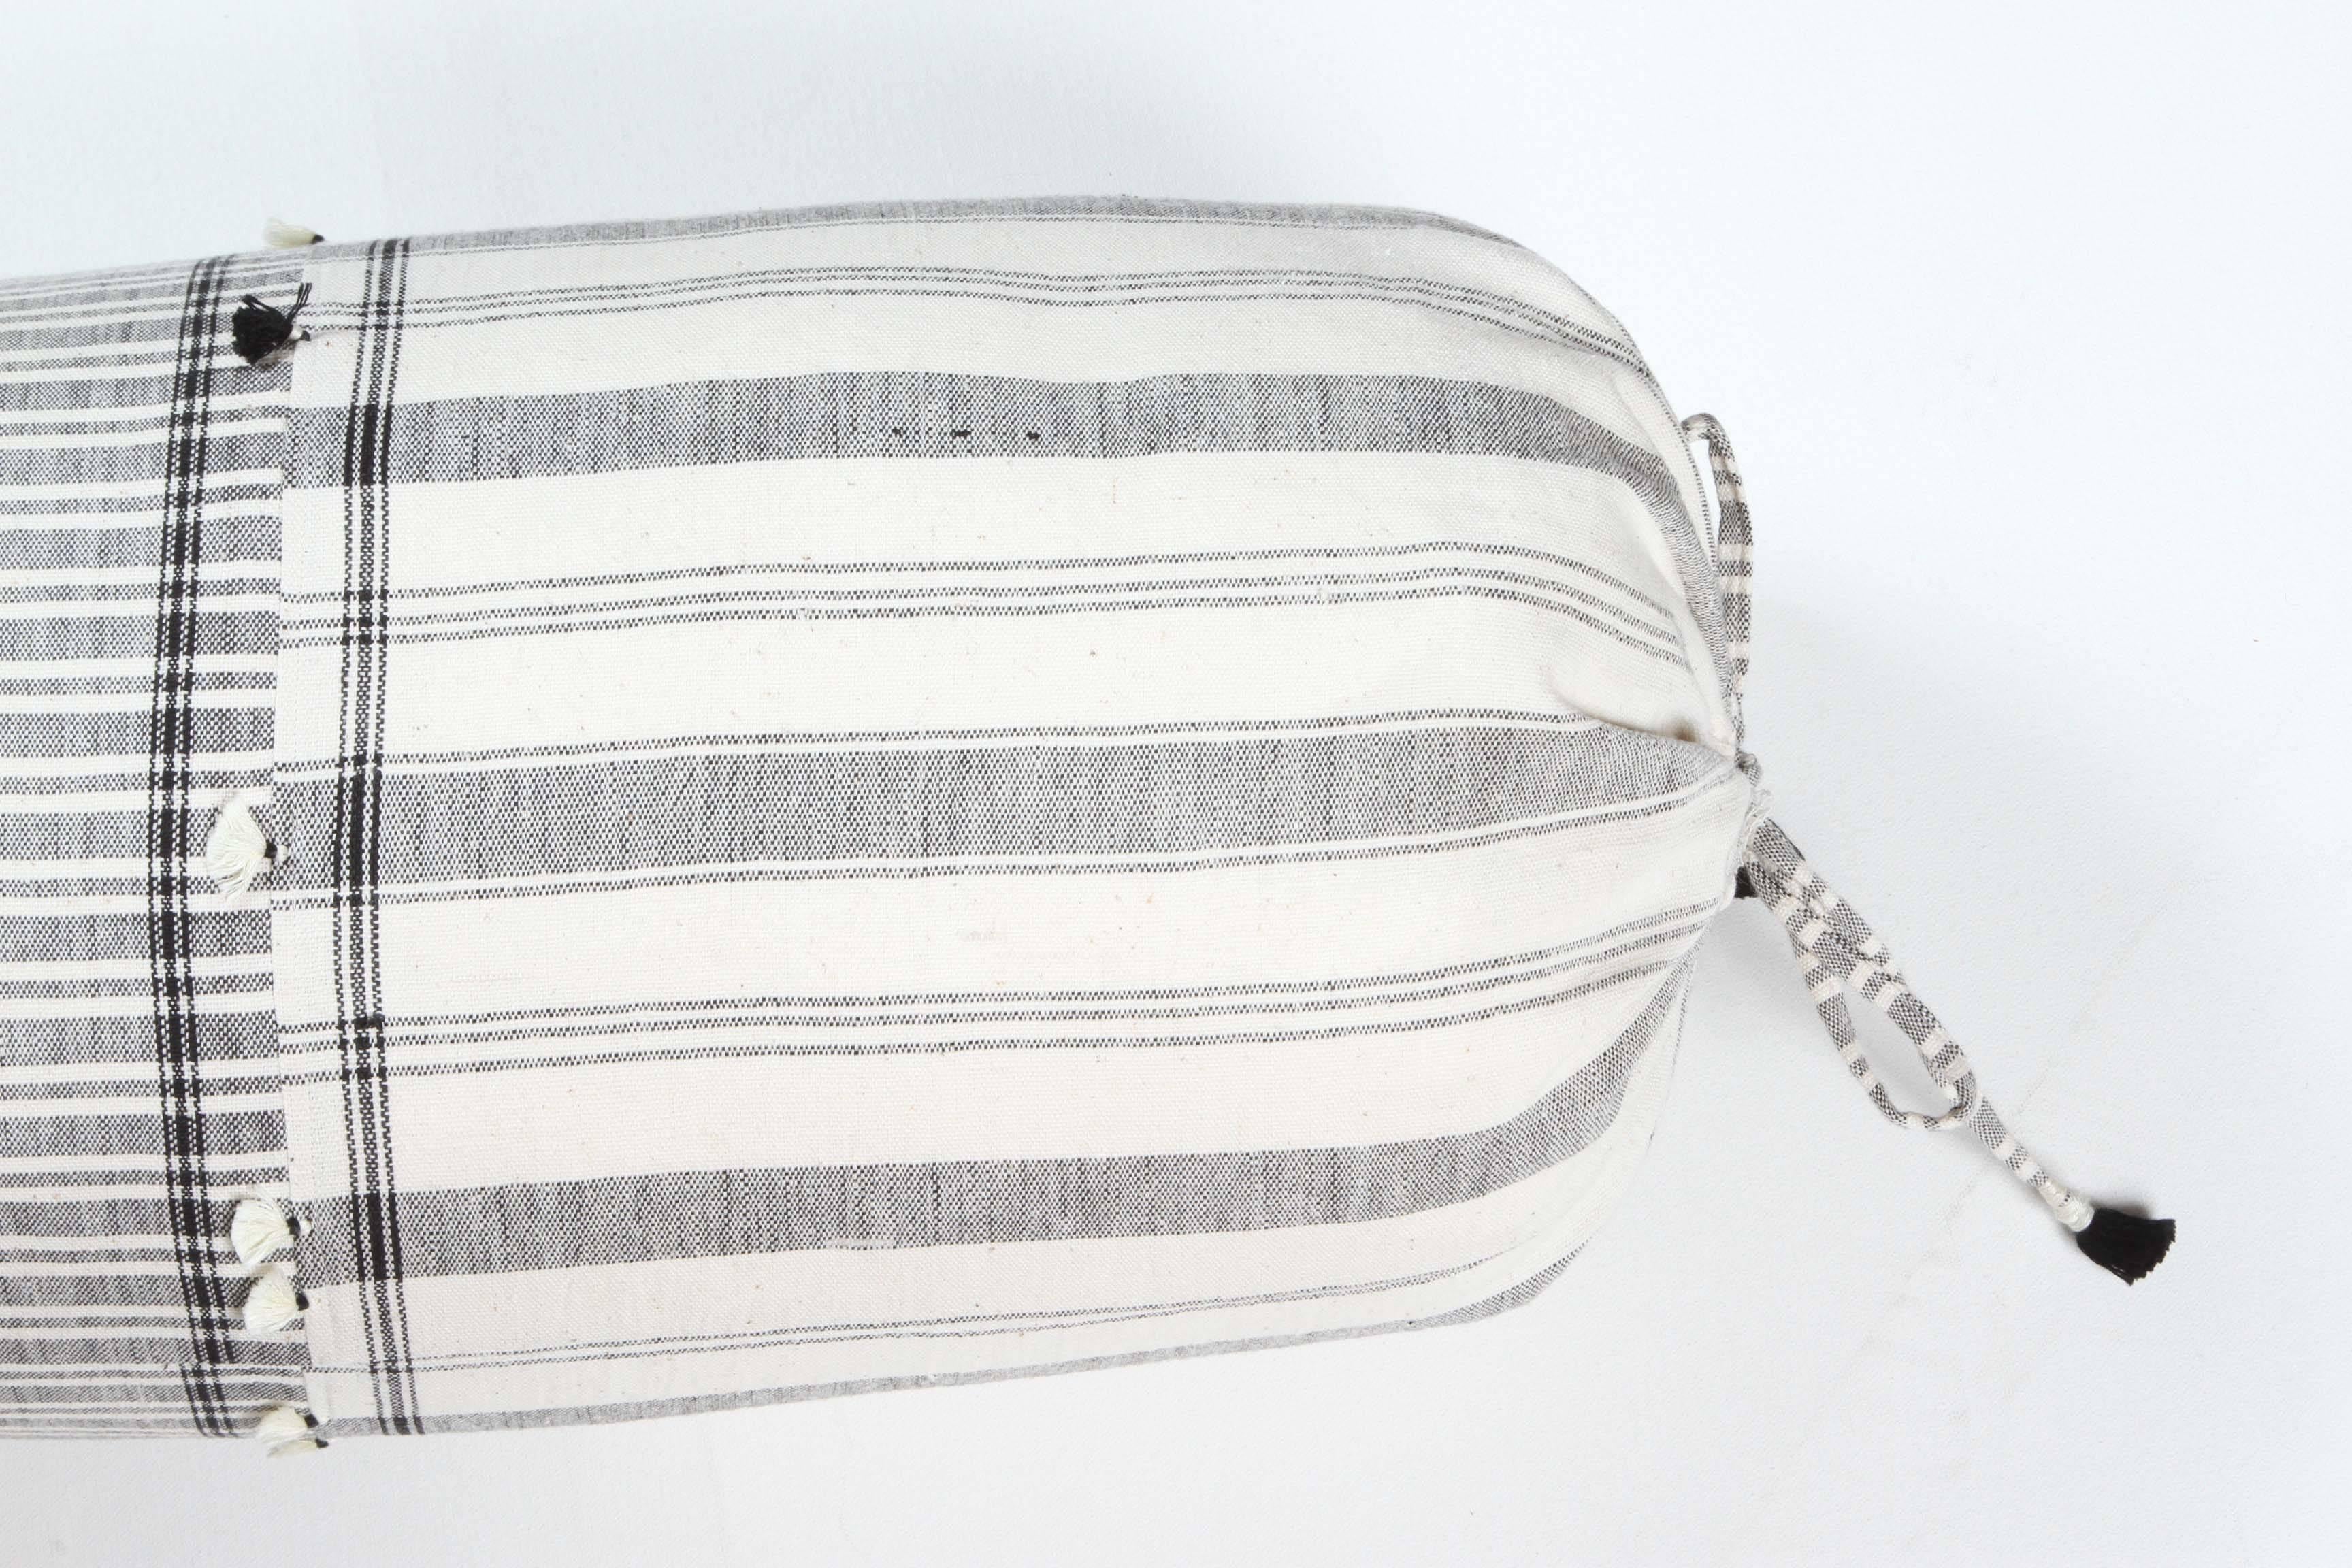 Kala naturally dyed organic cotton from Gujarat, India.  Hand loomed using  traditional Indian textile techniques to produce extra weft woven stripes.  This black and white bolster has added hand knotted tassels.